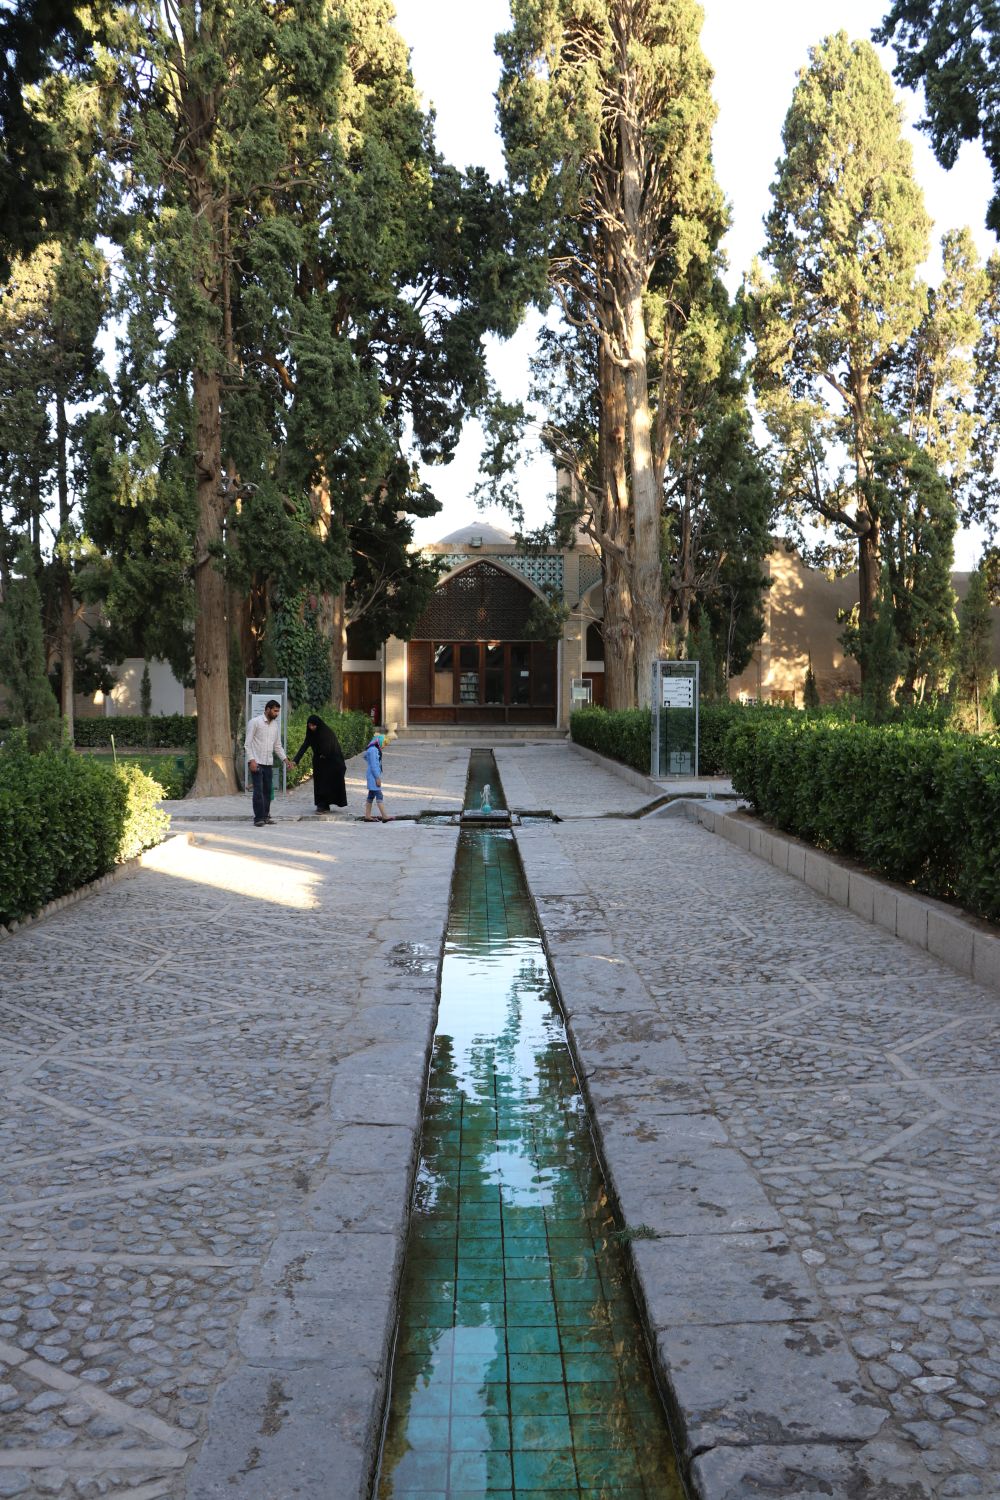 Bagh-i Fin - Water channel in center of garden.